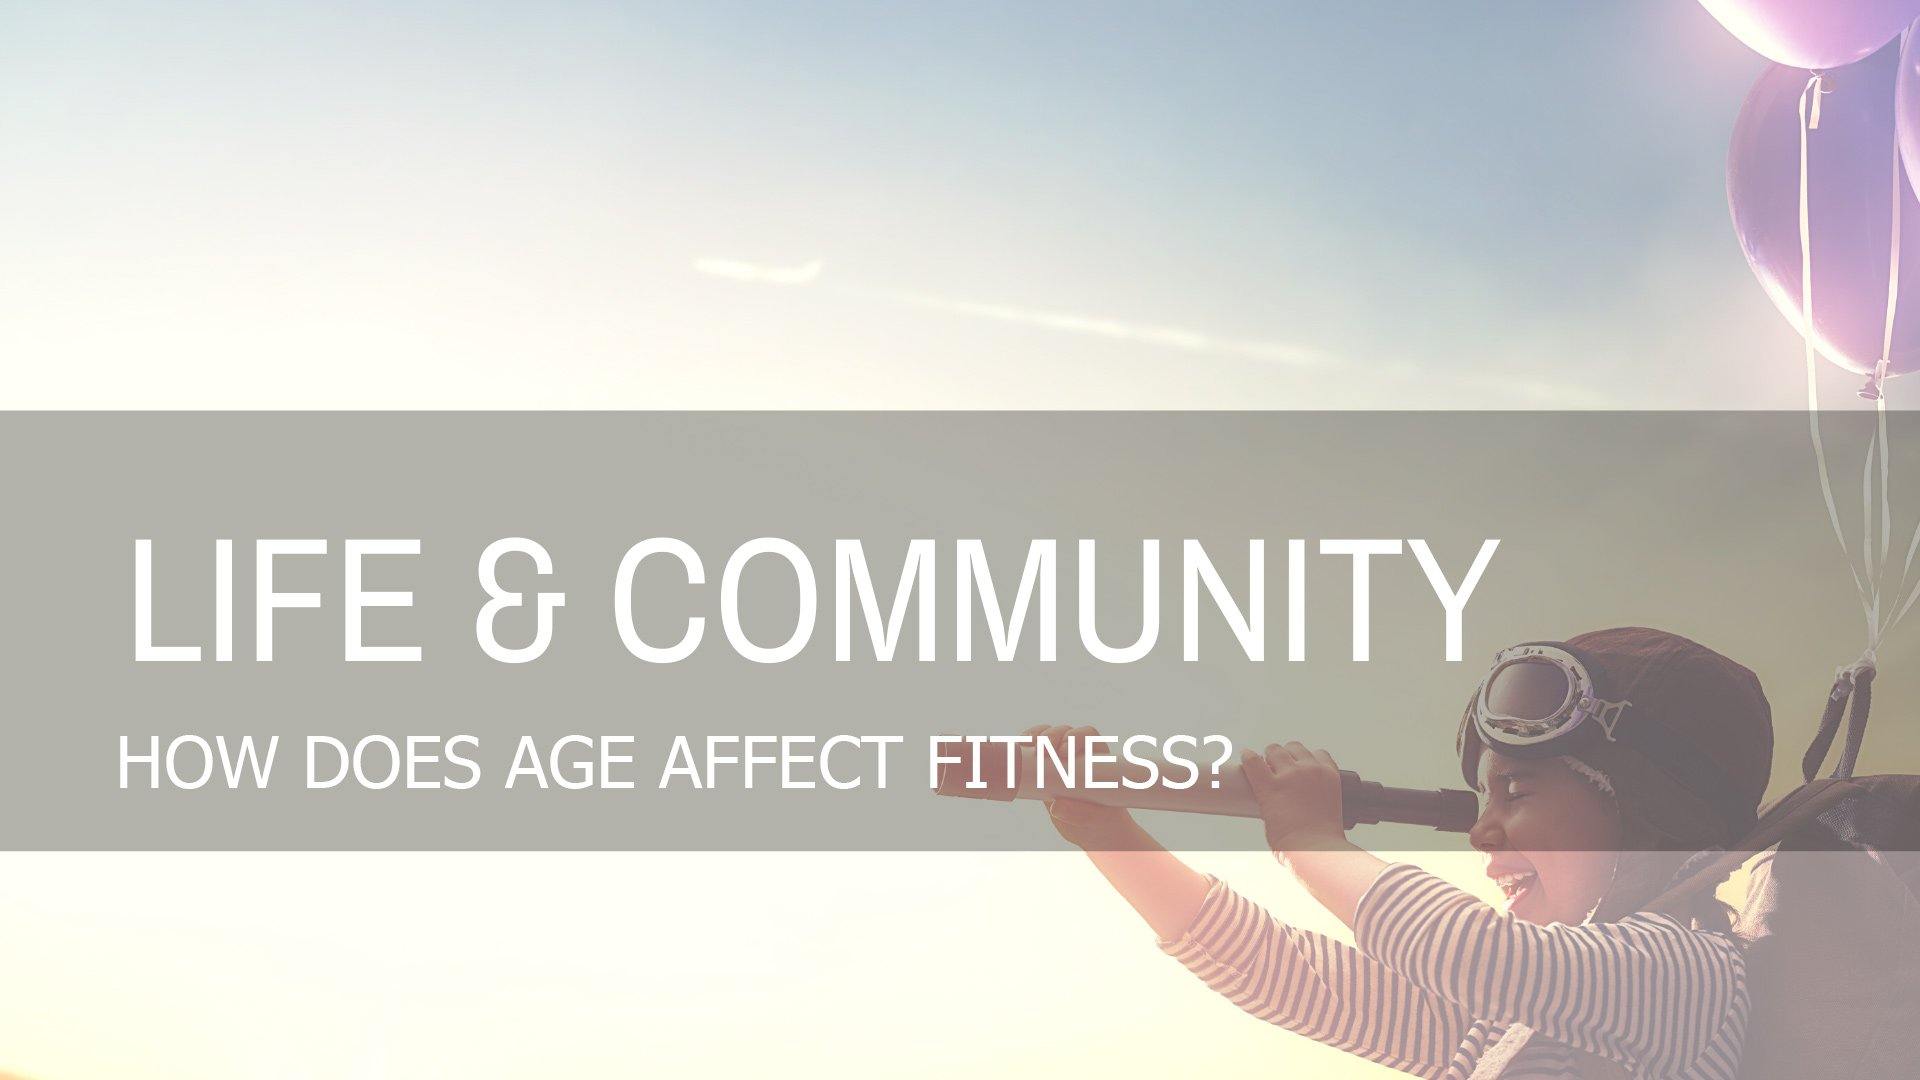 How Does Your Fitness Decline with Age?